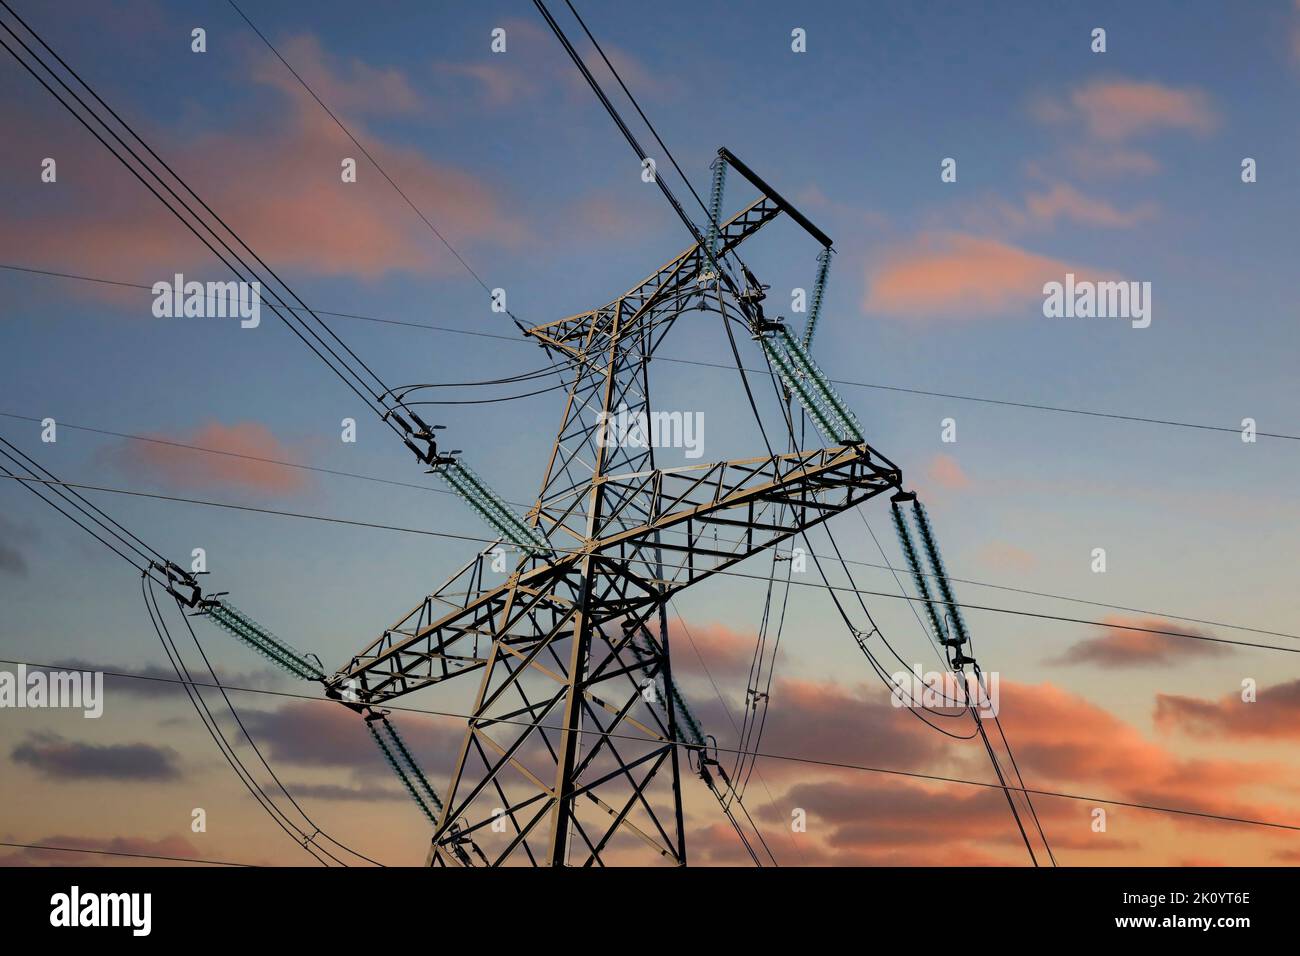 Overhead transmission line tower against sunset sky, detail. Stock Photo